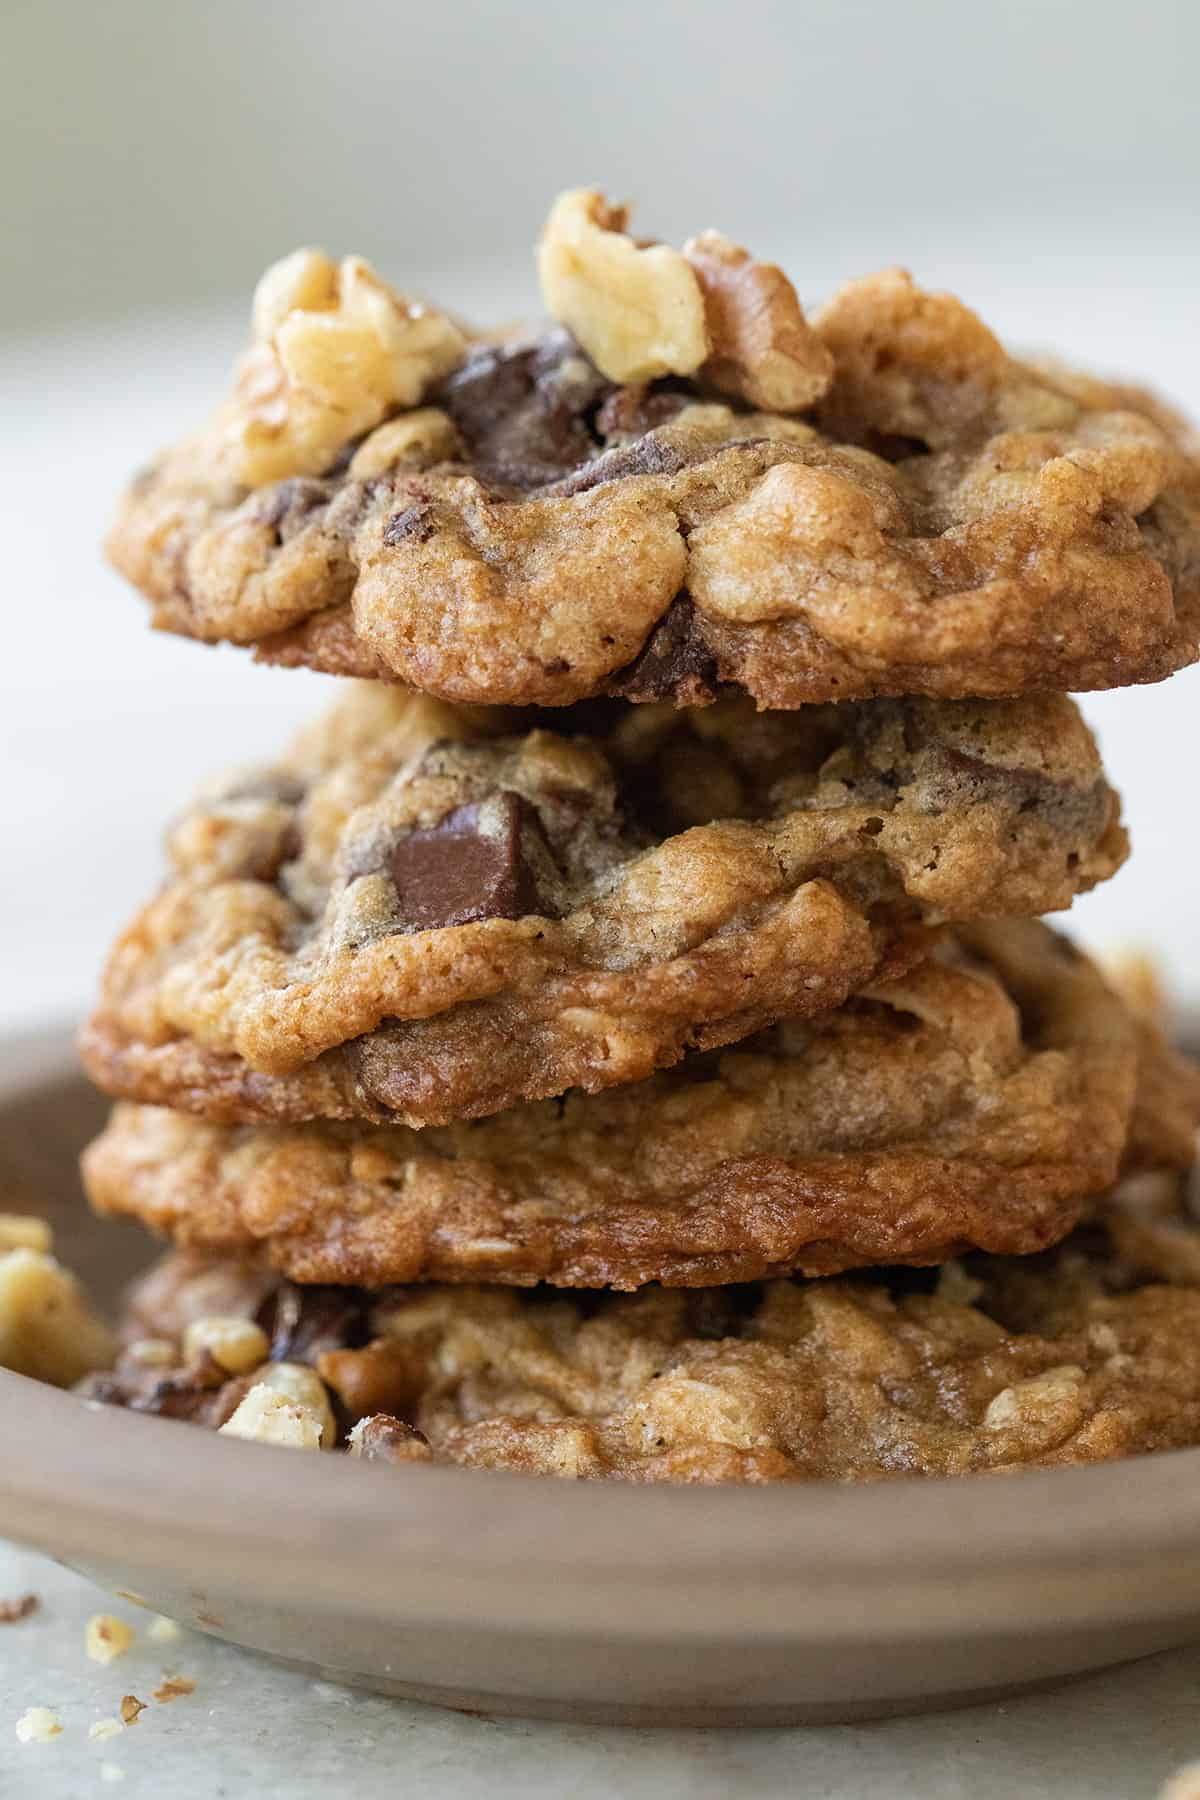 Stack of cookies with chocolate chips and walnuts.